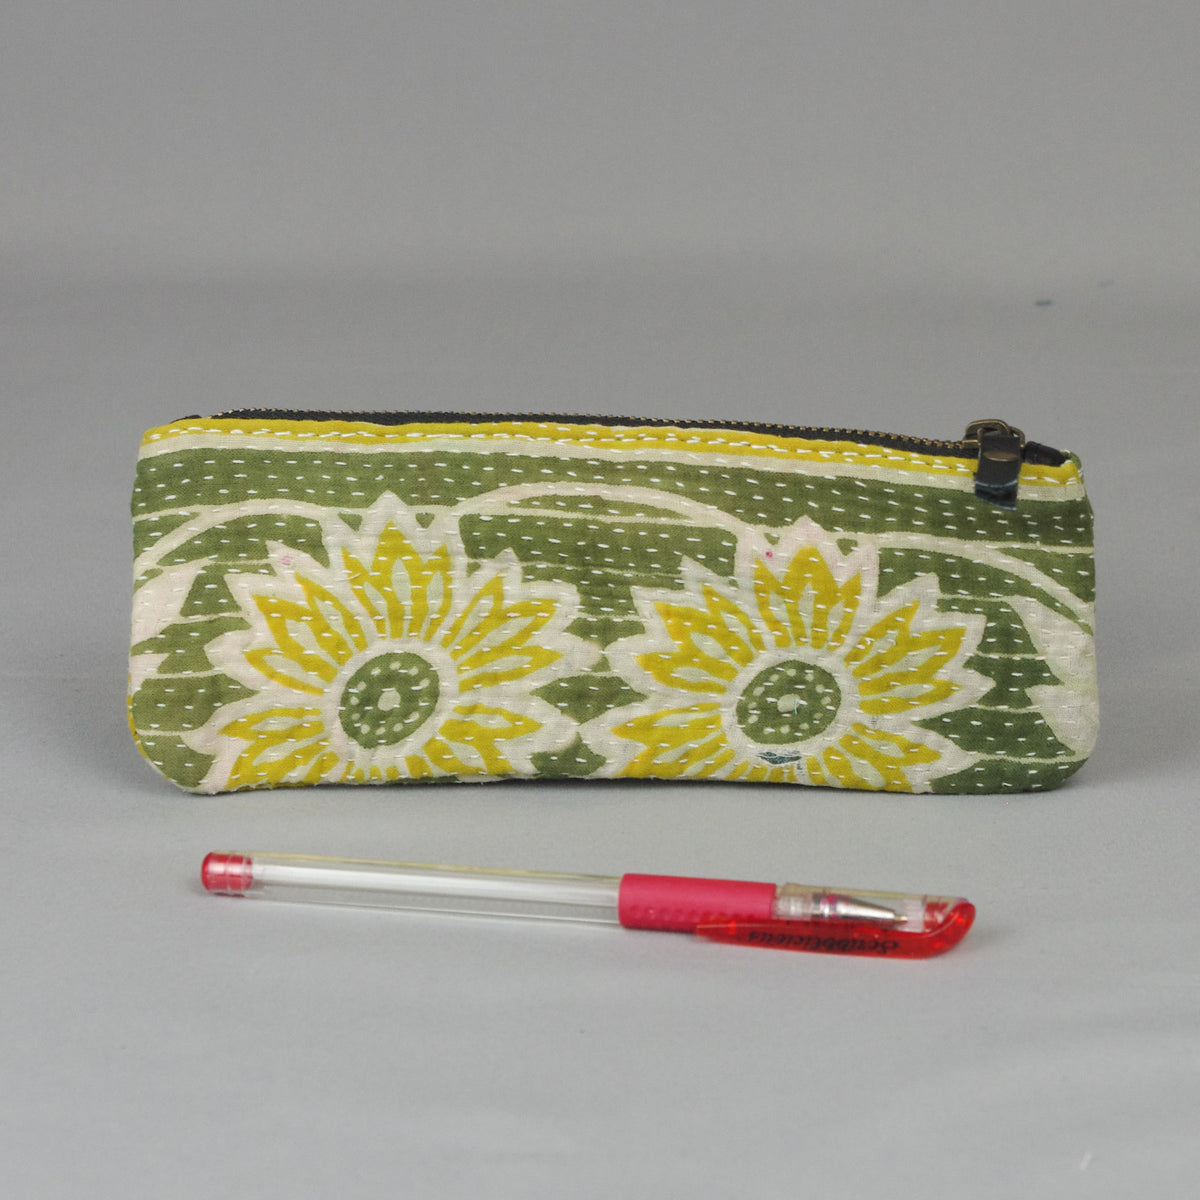 Vintage Kantha Small Pencil Case - Green Yellow Floral